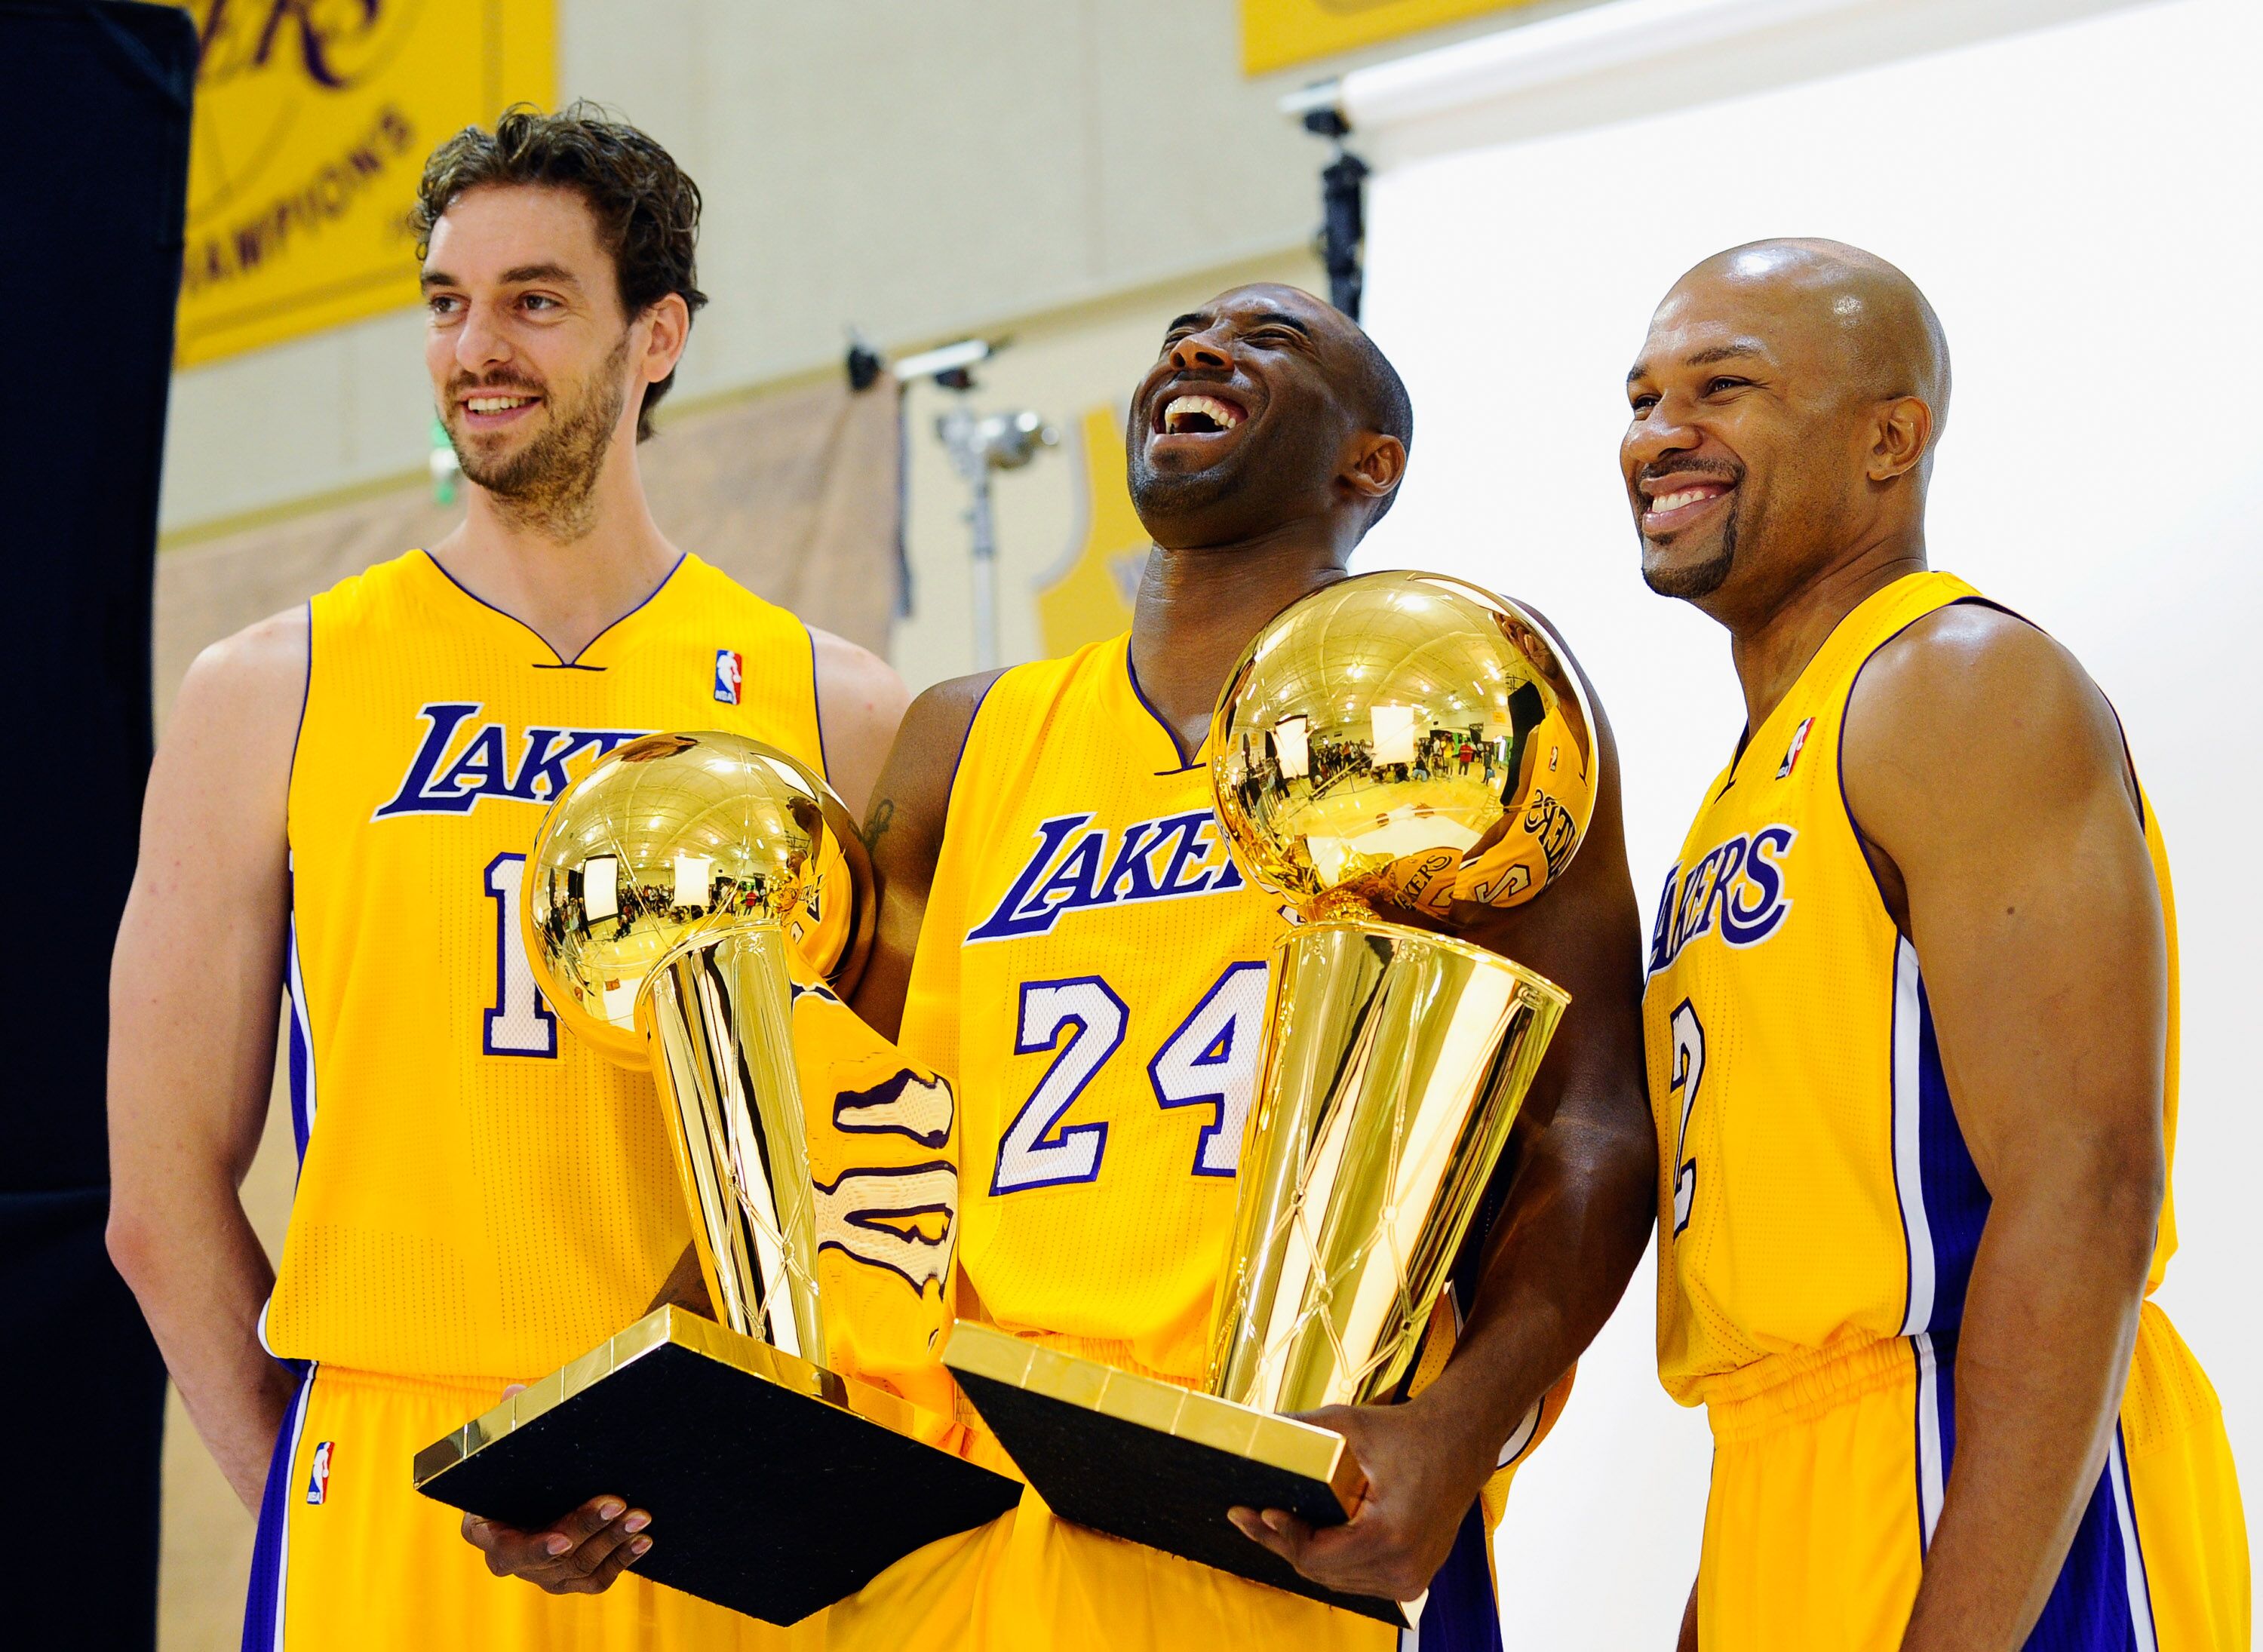 Kobe Bryant #24 of the Los Angeles Lakers laughs as he holds two NBA Finals Larry O'Brien Championship Trophy's as he poses for a photograph with teammates Pau Gasol #16 and Derek Fisher #2 during Media Day at the Toyota Center in El Segundo, California | Photo: Getty Images